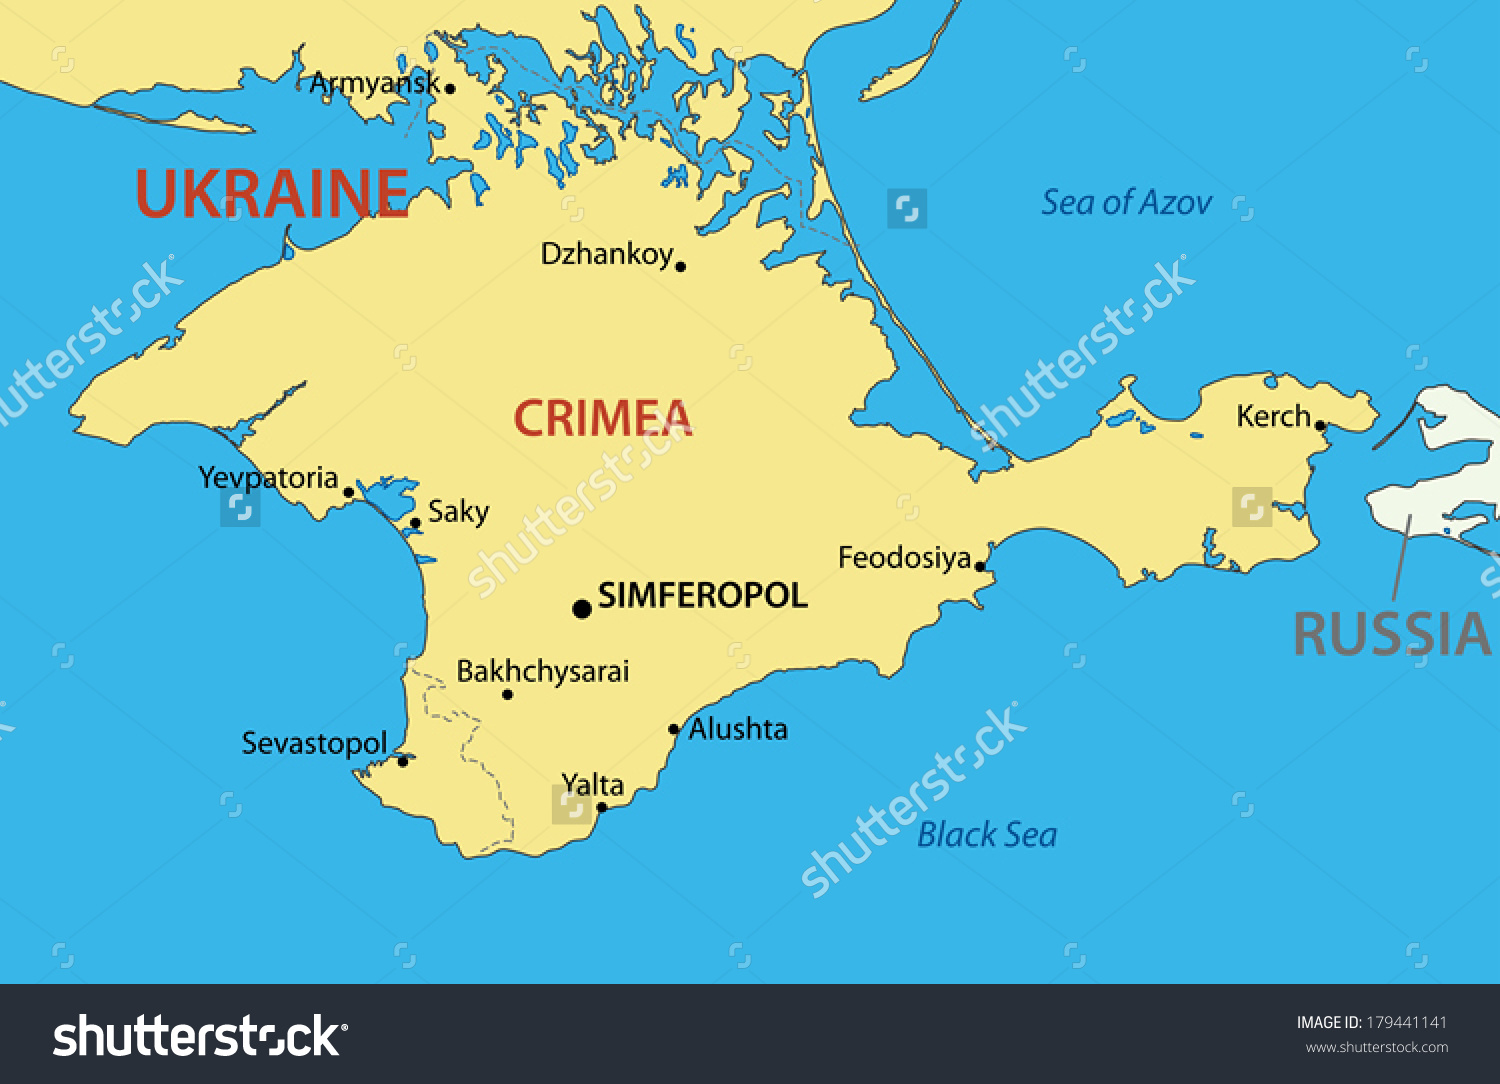 Crimea clipart #5, Download drawings